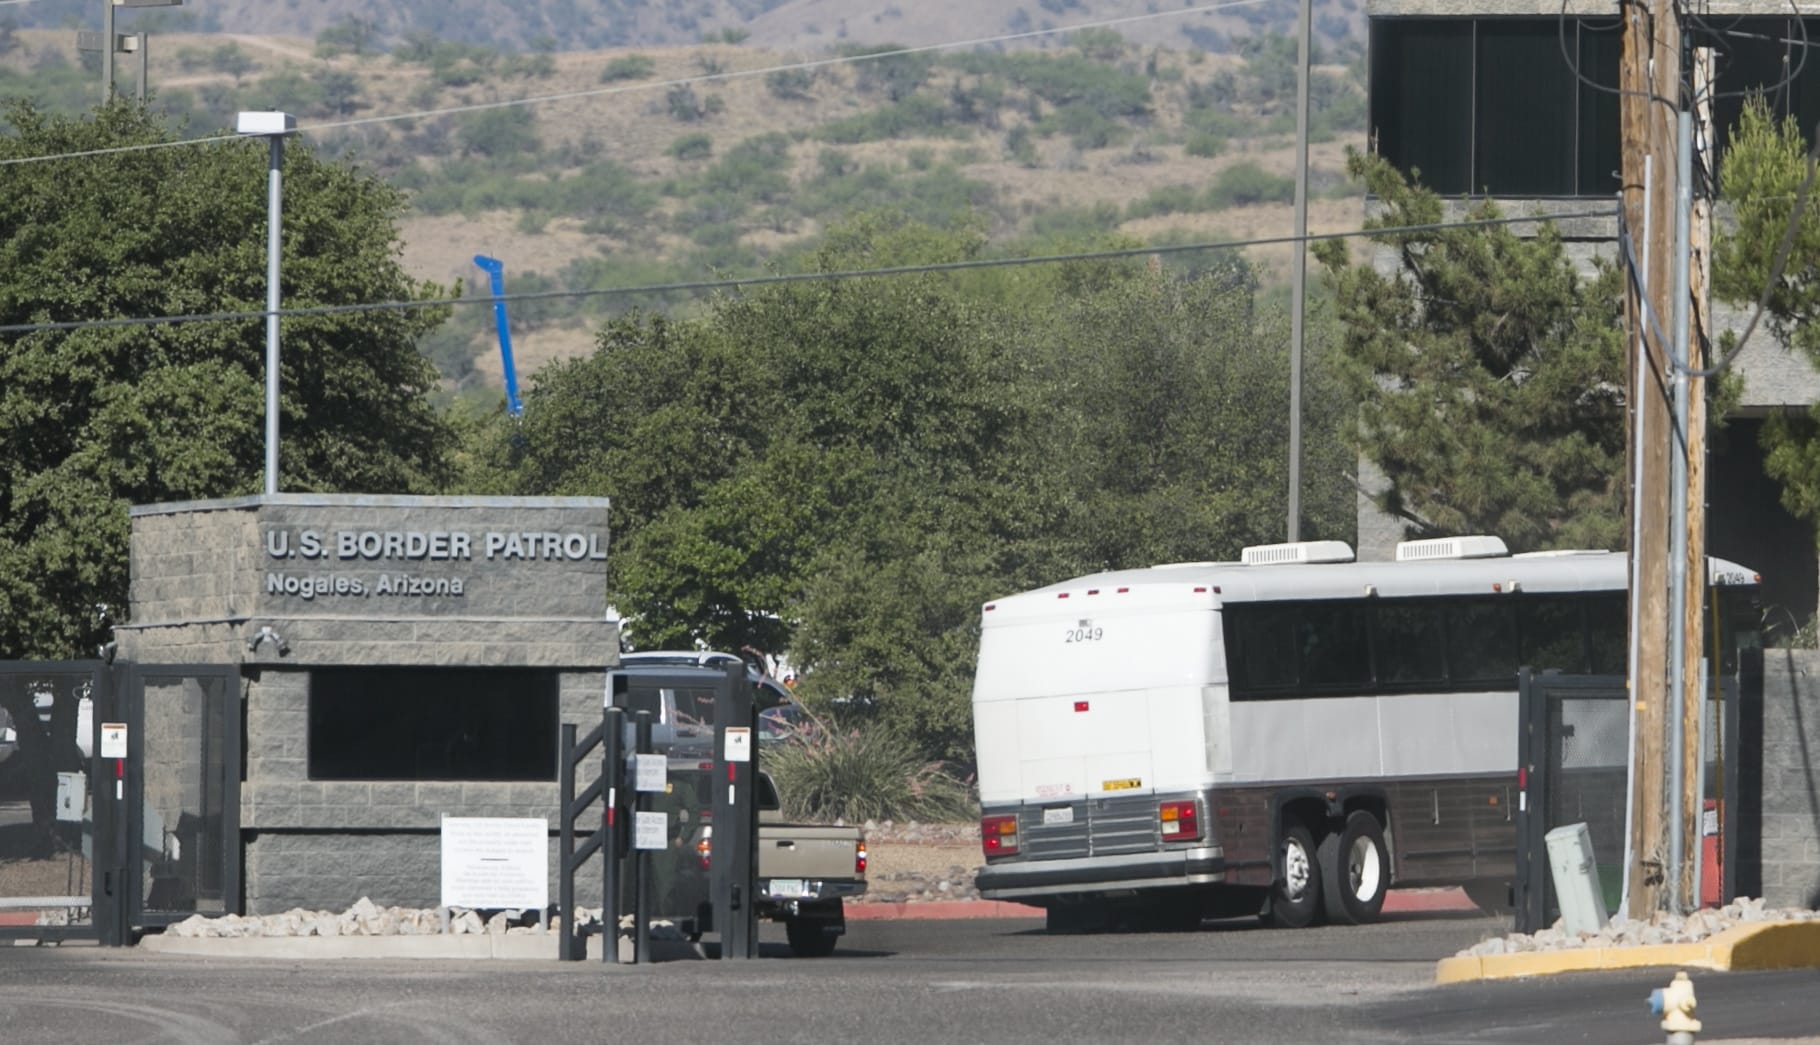 A bus carrying children arrives Saturday at a border patrol facility in Nogales, Ariz.